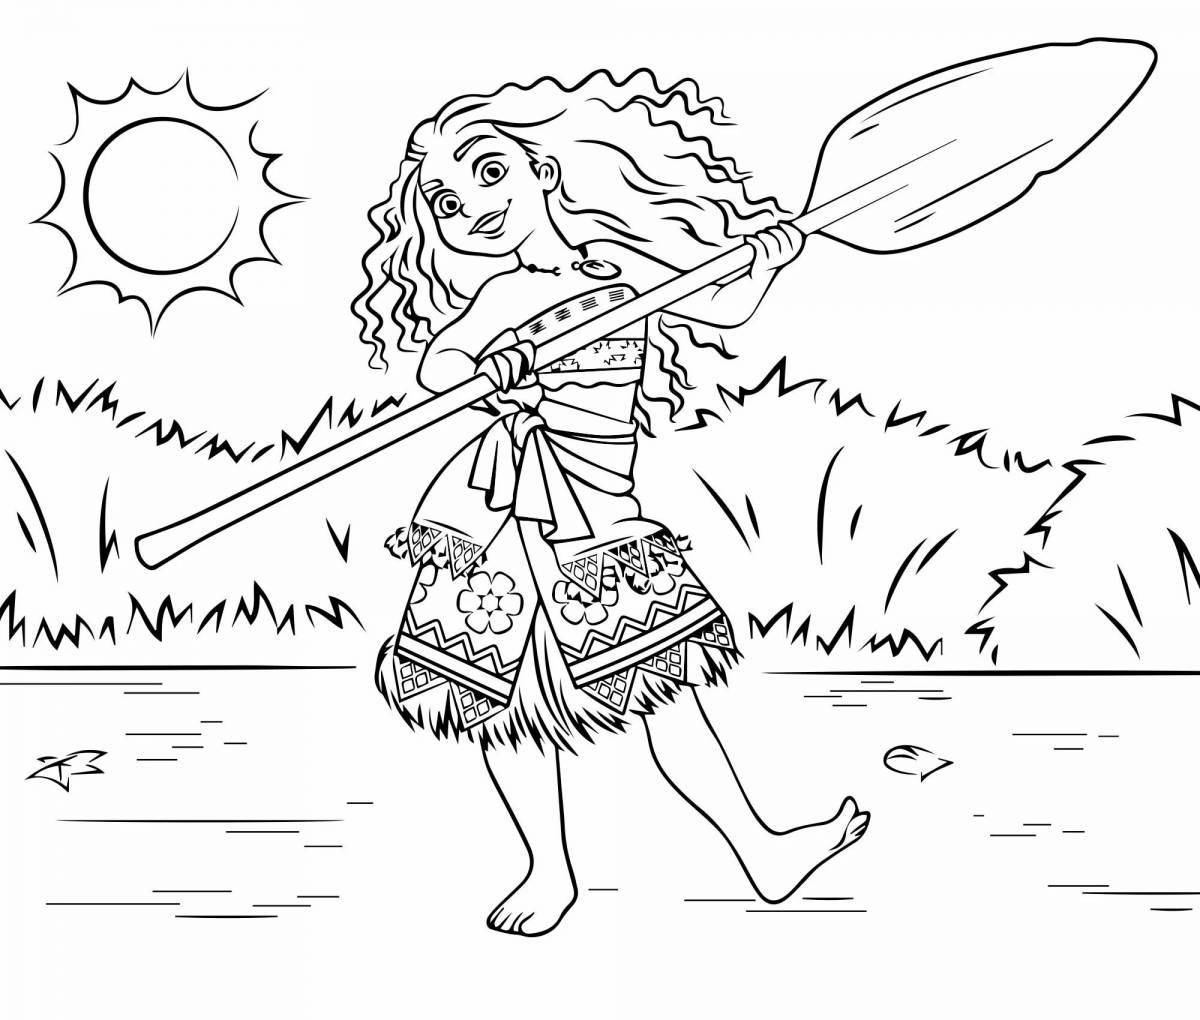 Great moana coloring book for kids